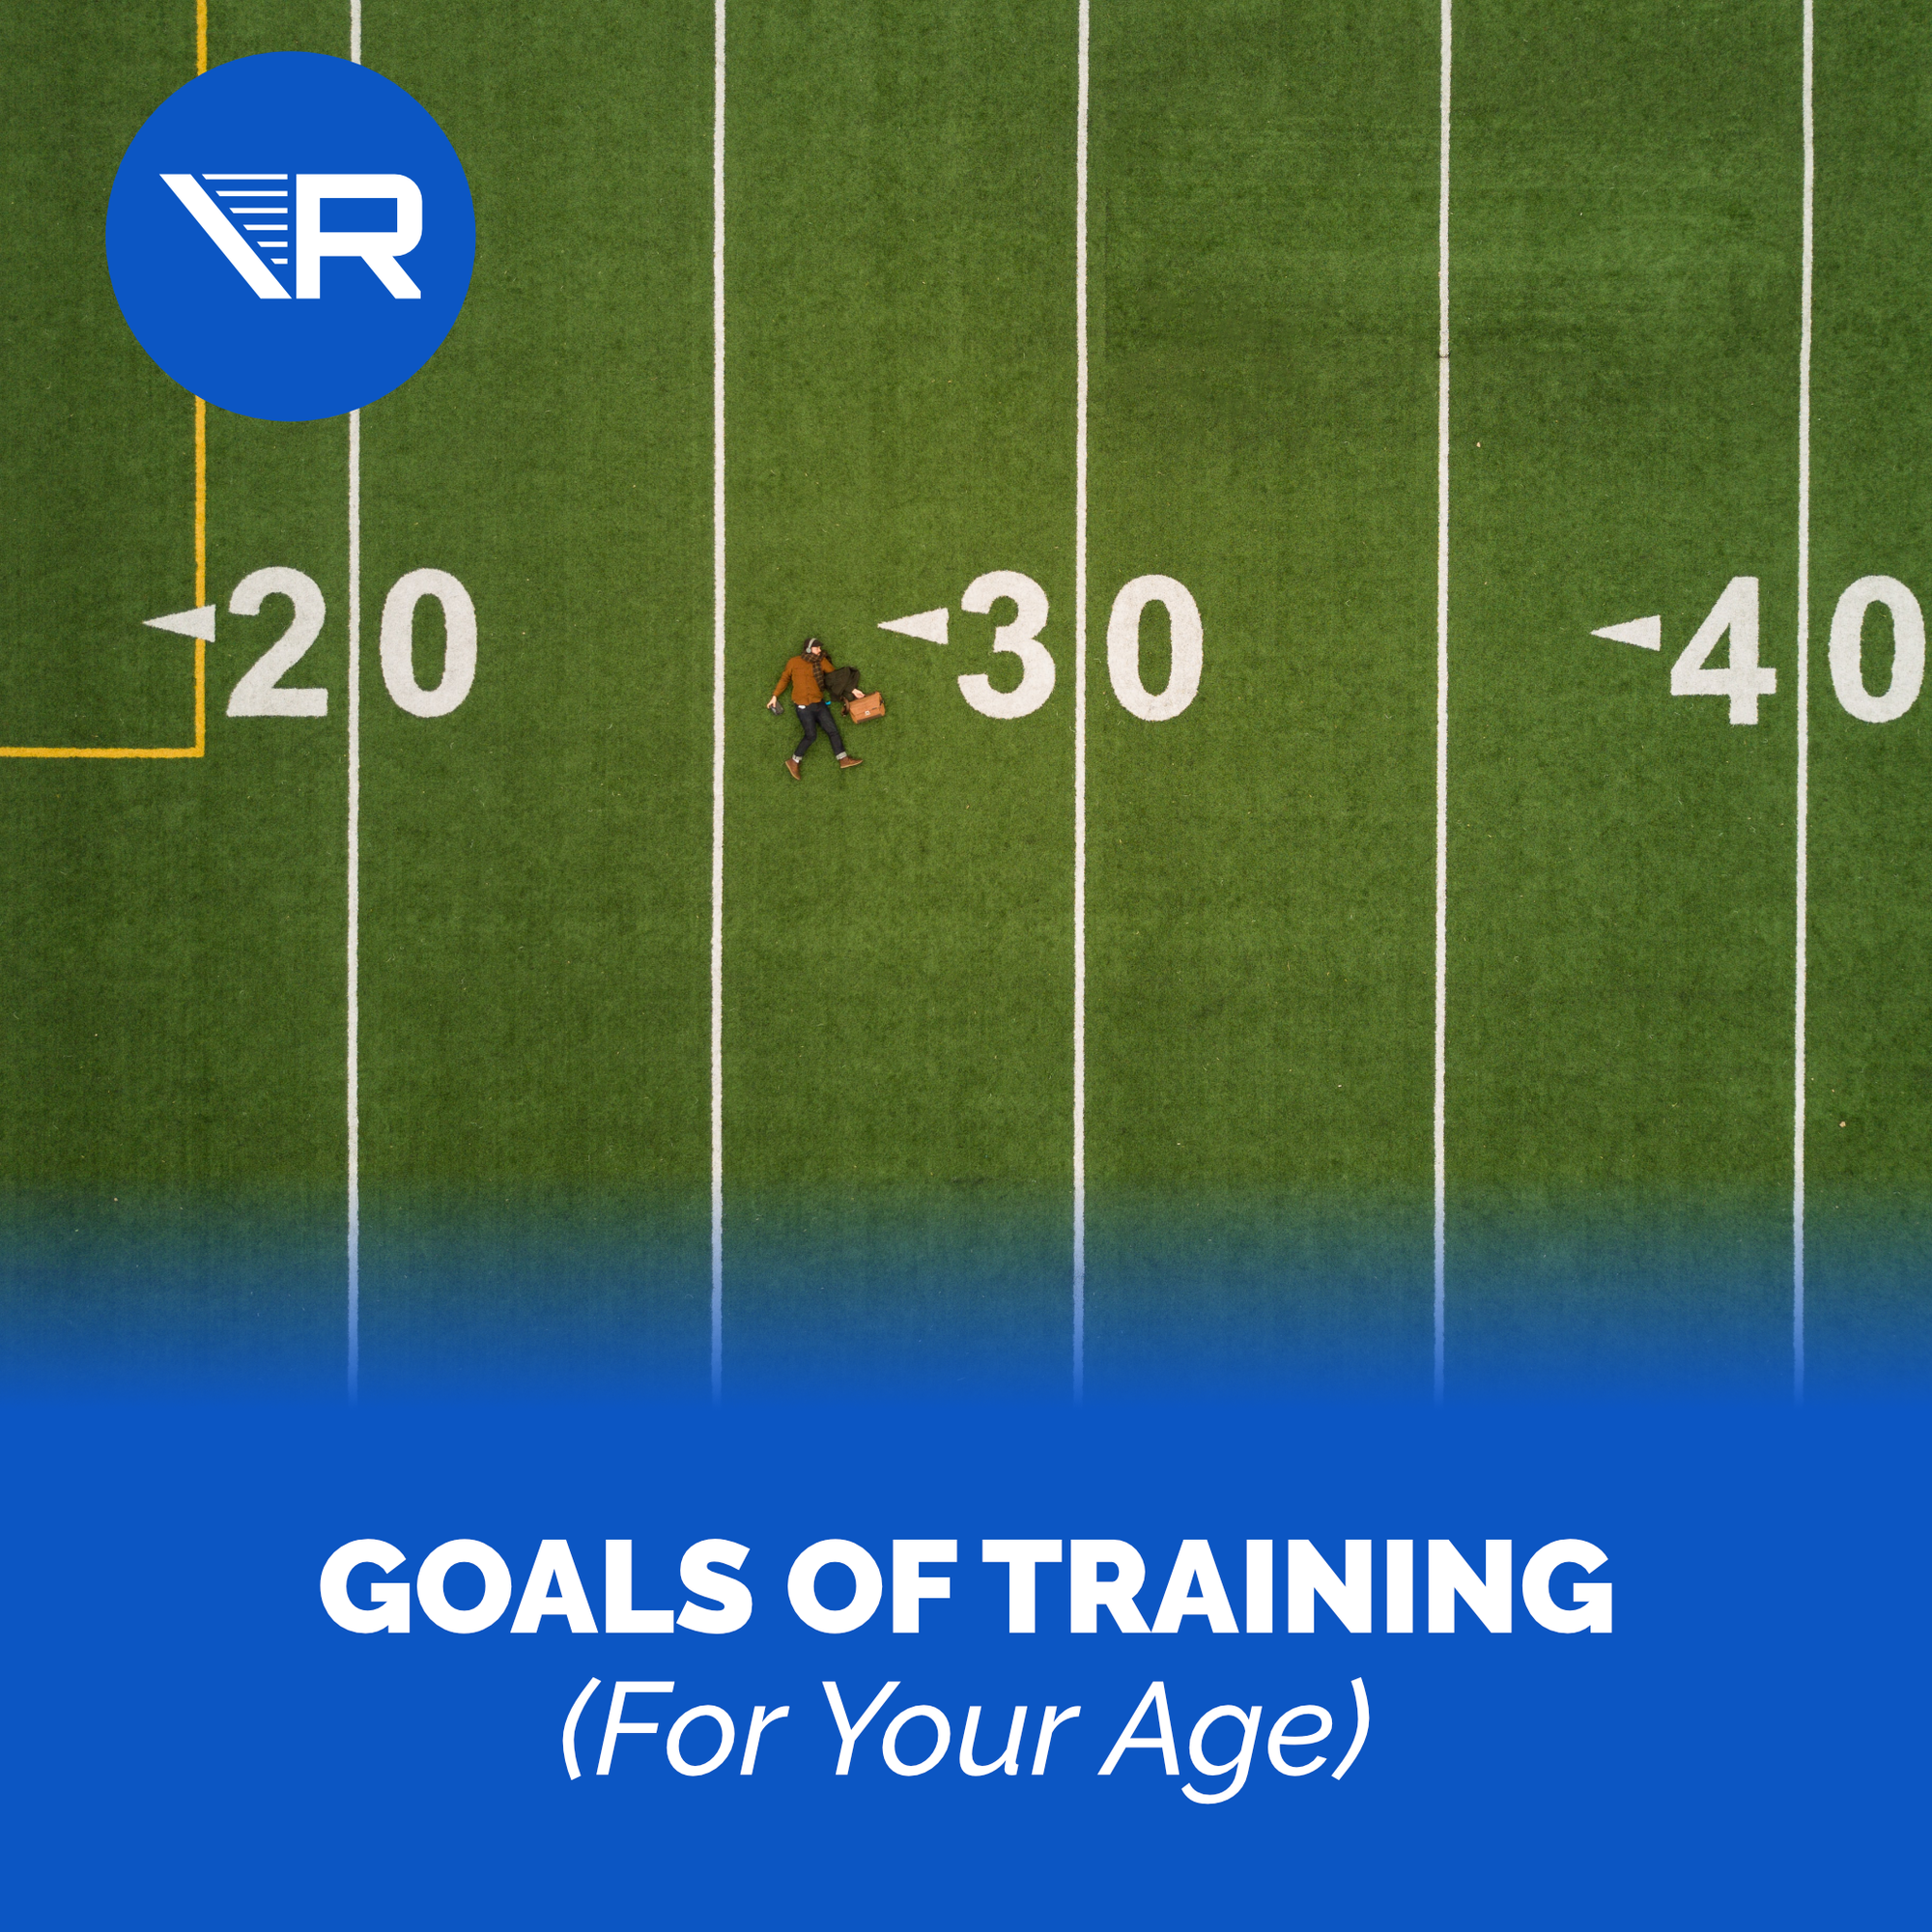 How to Set Training Goals Depending on Age